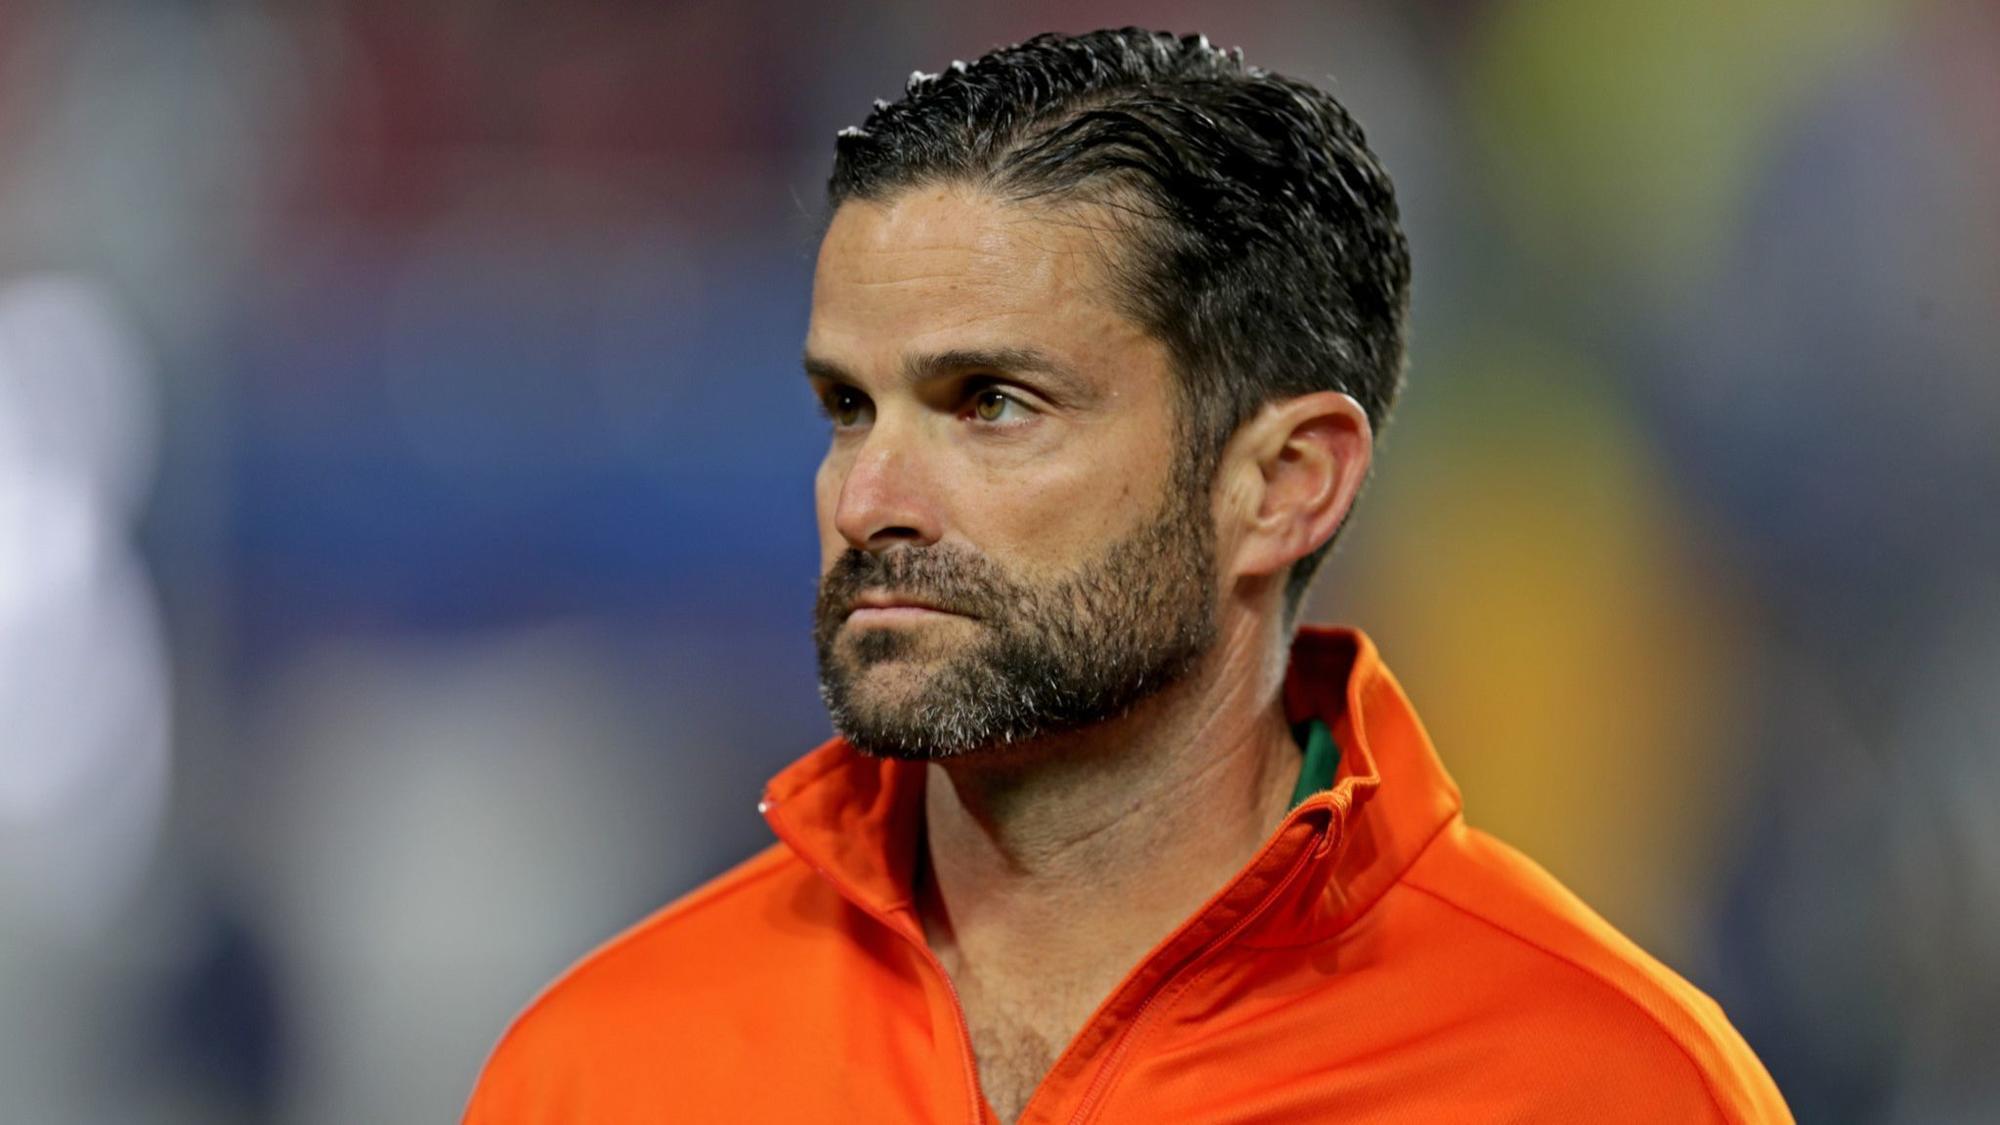 Miami Hires Defensive Coordinator Manny Diaz As Head Coach Days After He Agreed To Go To Temple